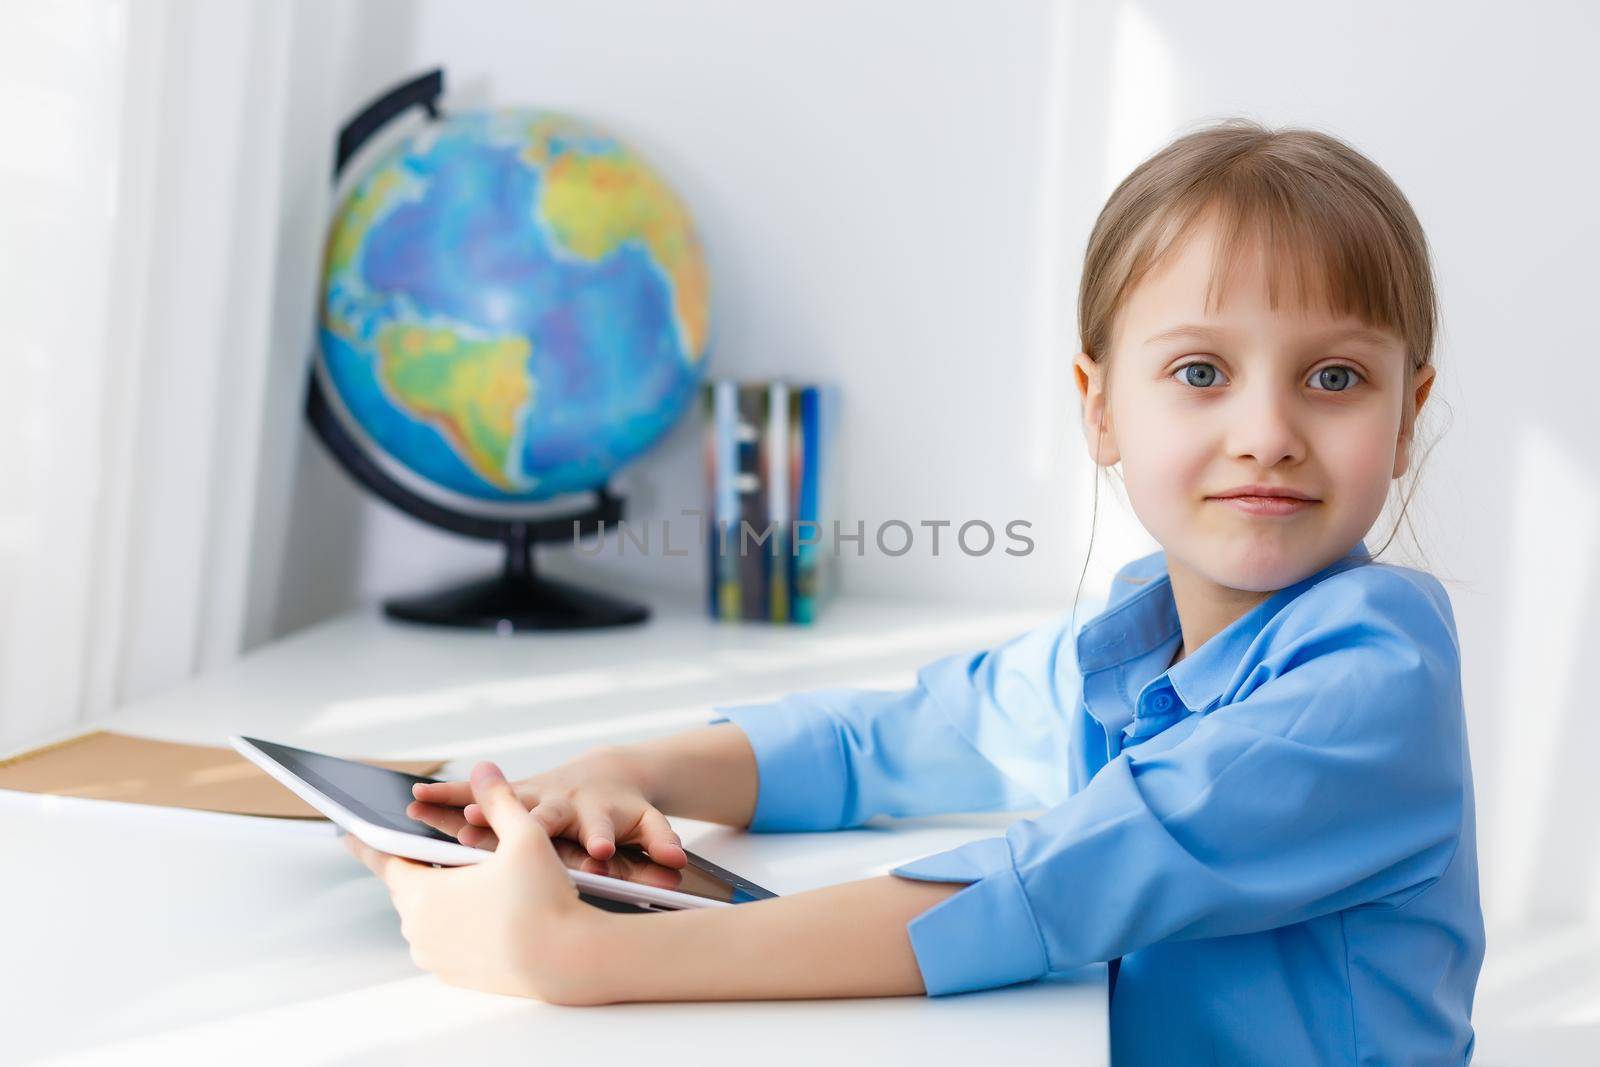 Smart little schoolgirl with digital tablet in a classroom. Child in an elementary school. Education and learning for kids.